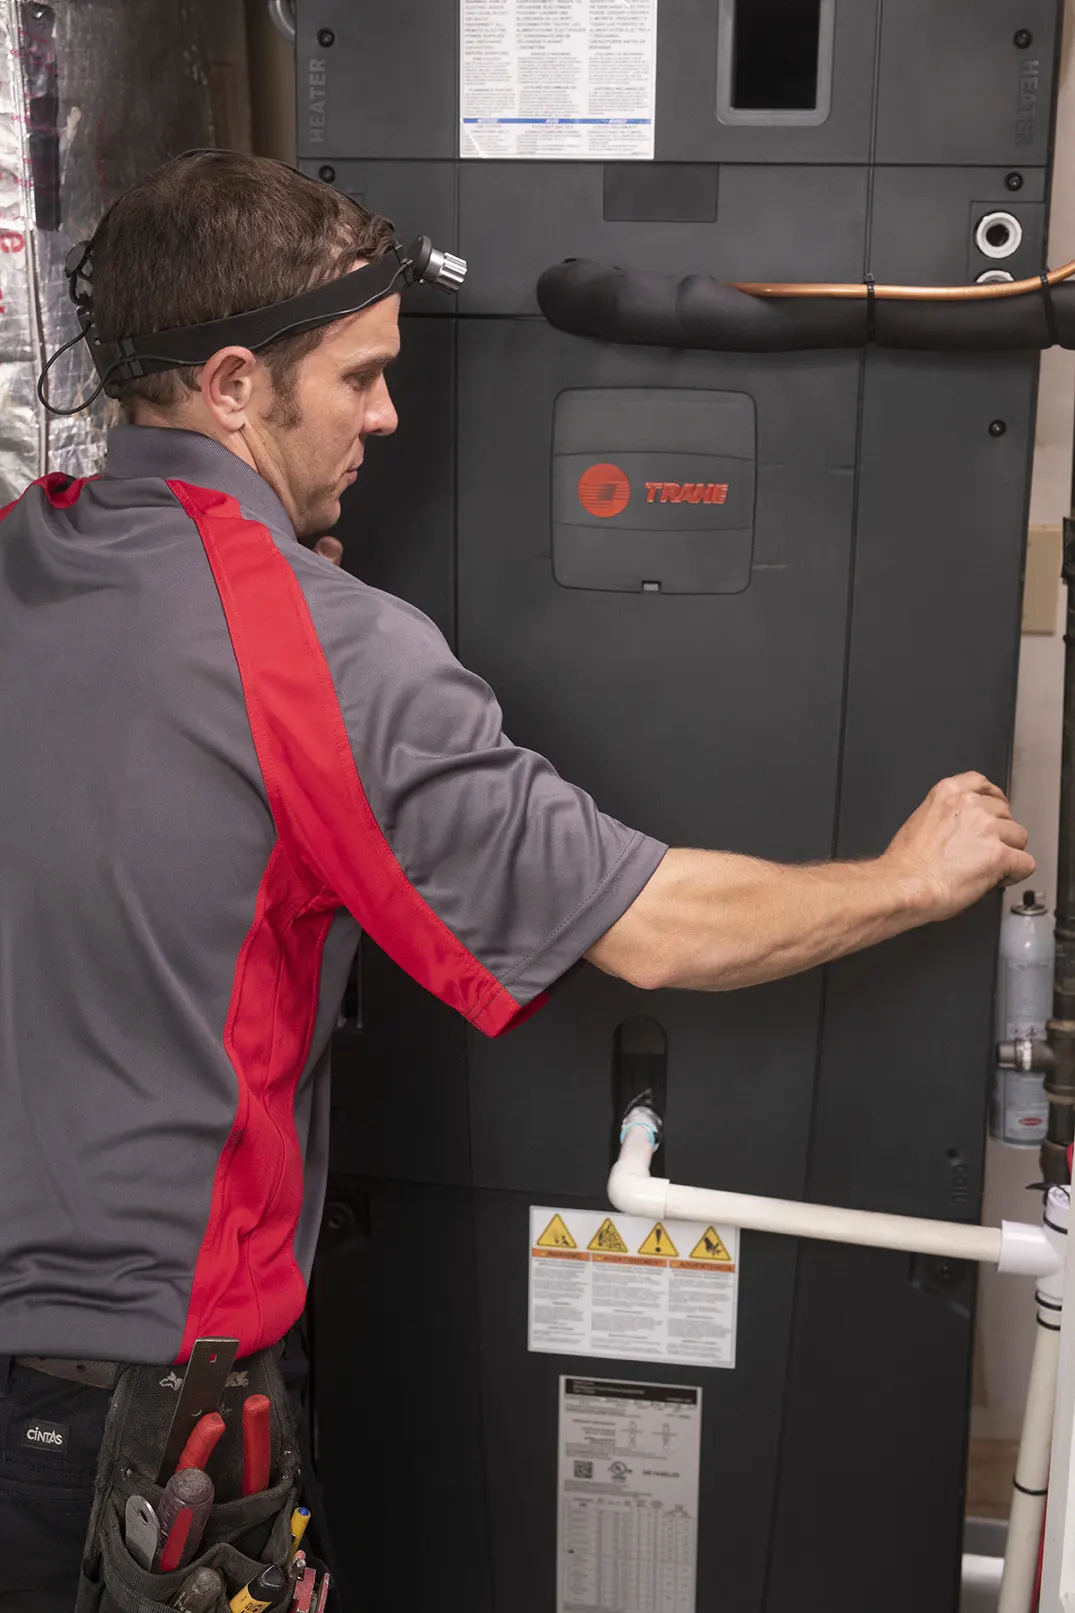 HVAC Service Tech working on furnace front panel at air handler | Epic A/C Service | epicacguy.com